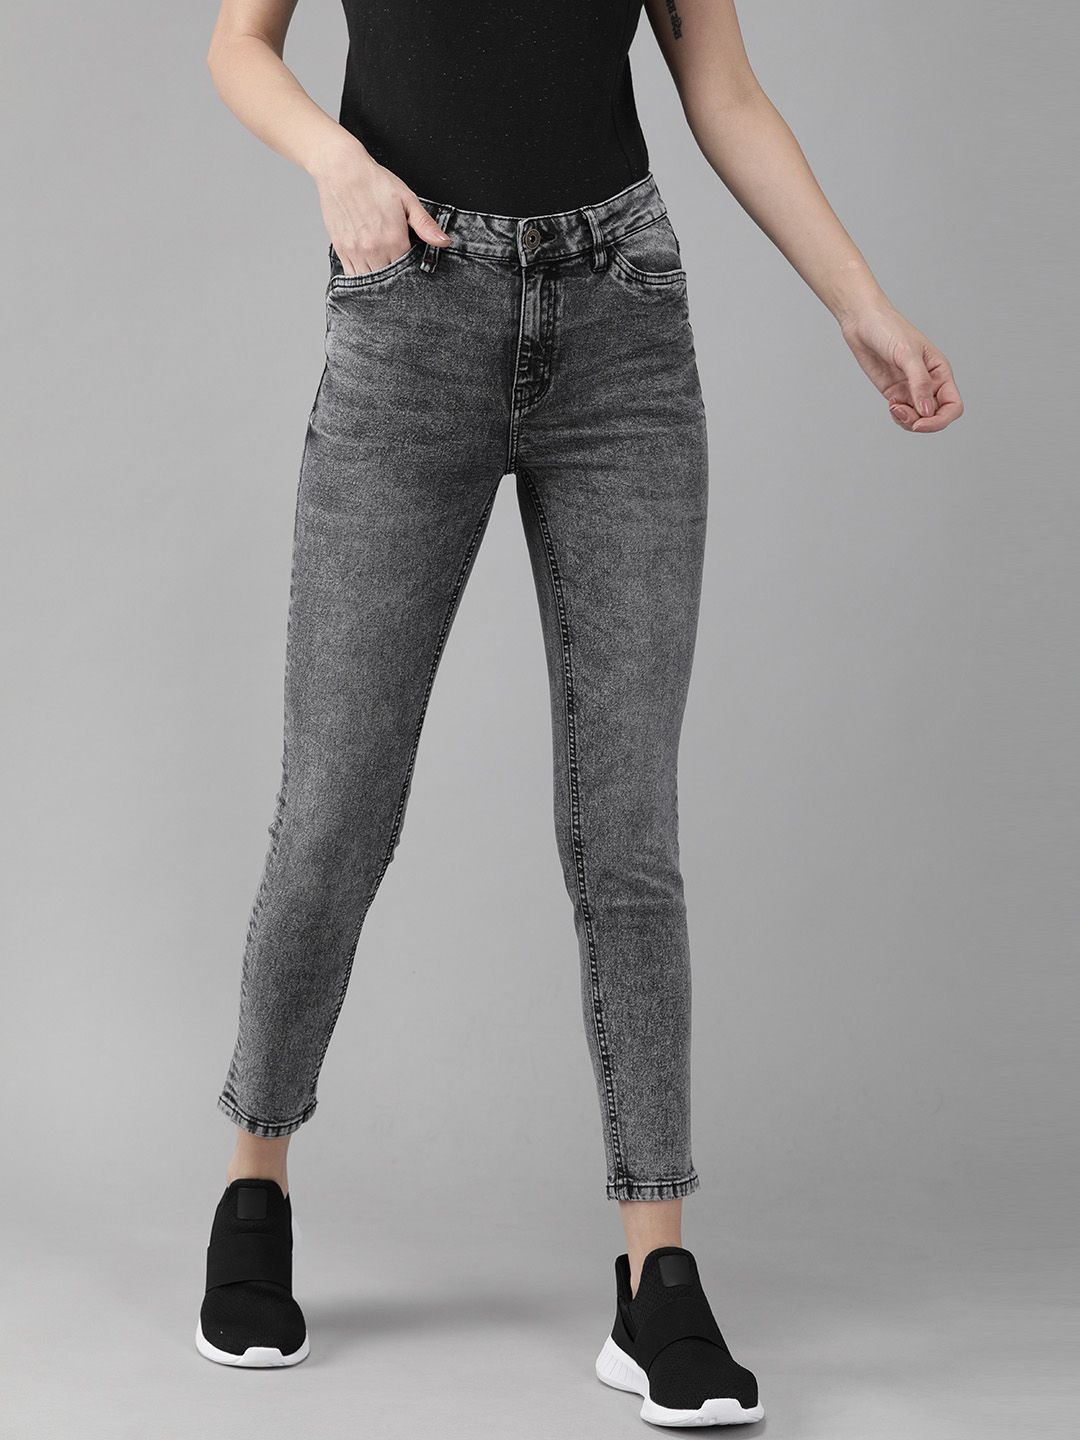 The Roadster Lifestyle Co Women Charcoal Grey Skinny Fit Mid-Rise Clean Look Jeans Price in India